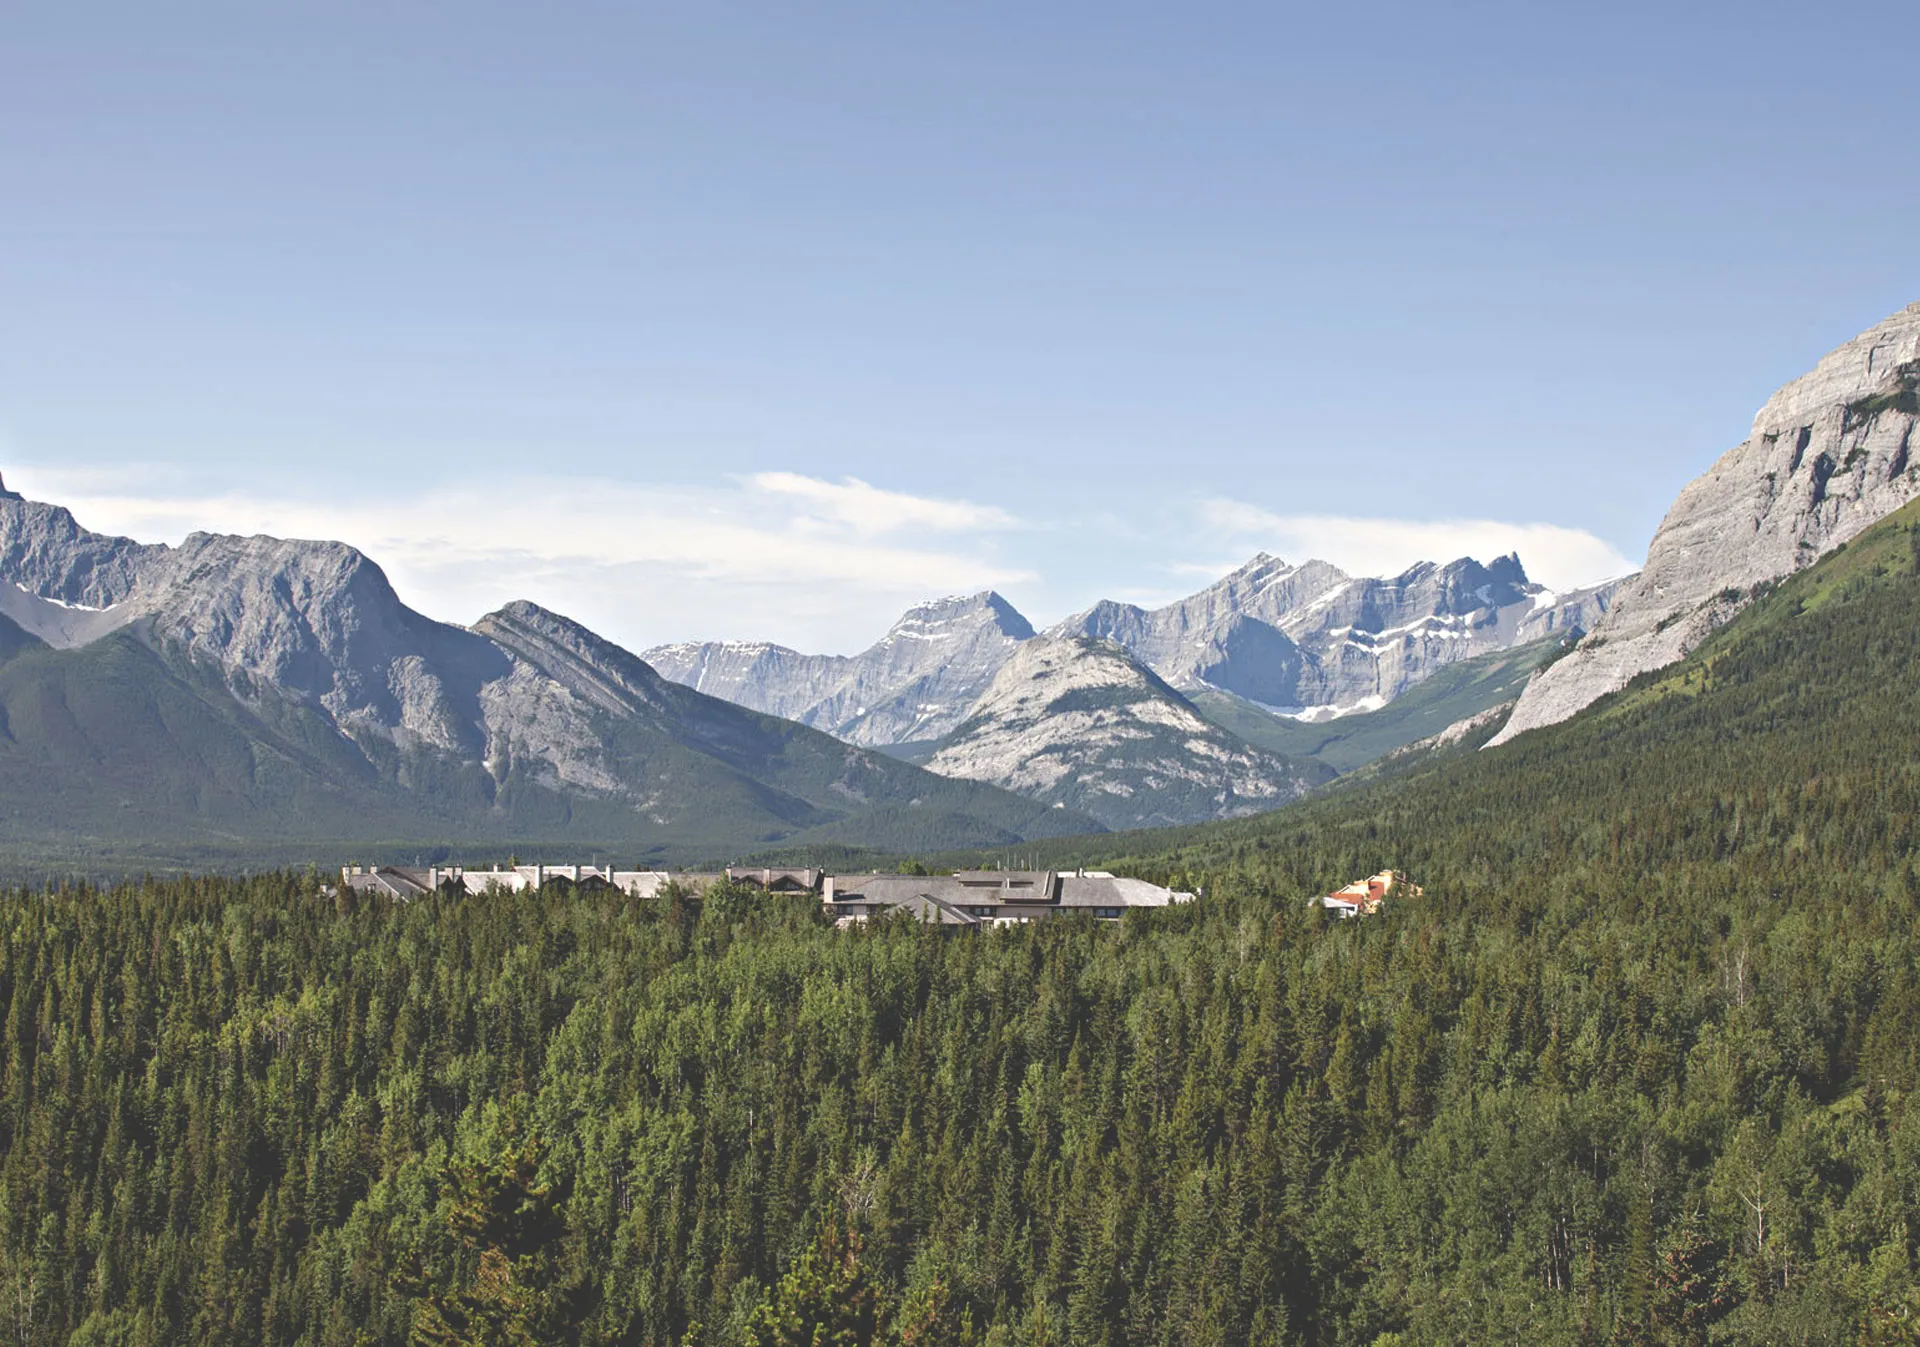 The Kananaskis Nordic Spa is located at the Pomeroy Kananaskis Mountain Lodge, approximately 1 hour from Downtown Calgary (Photo credit: Tourism Canmore Kananaskis).